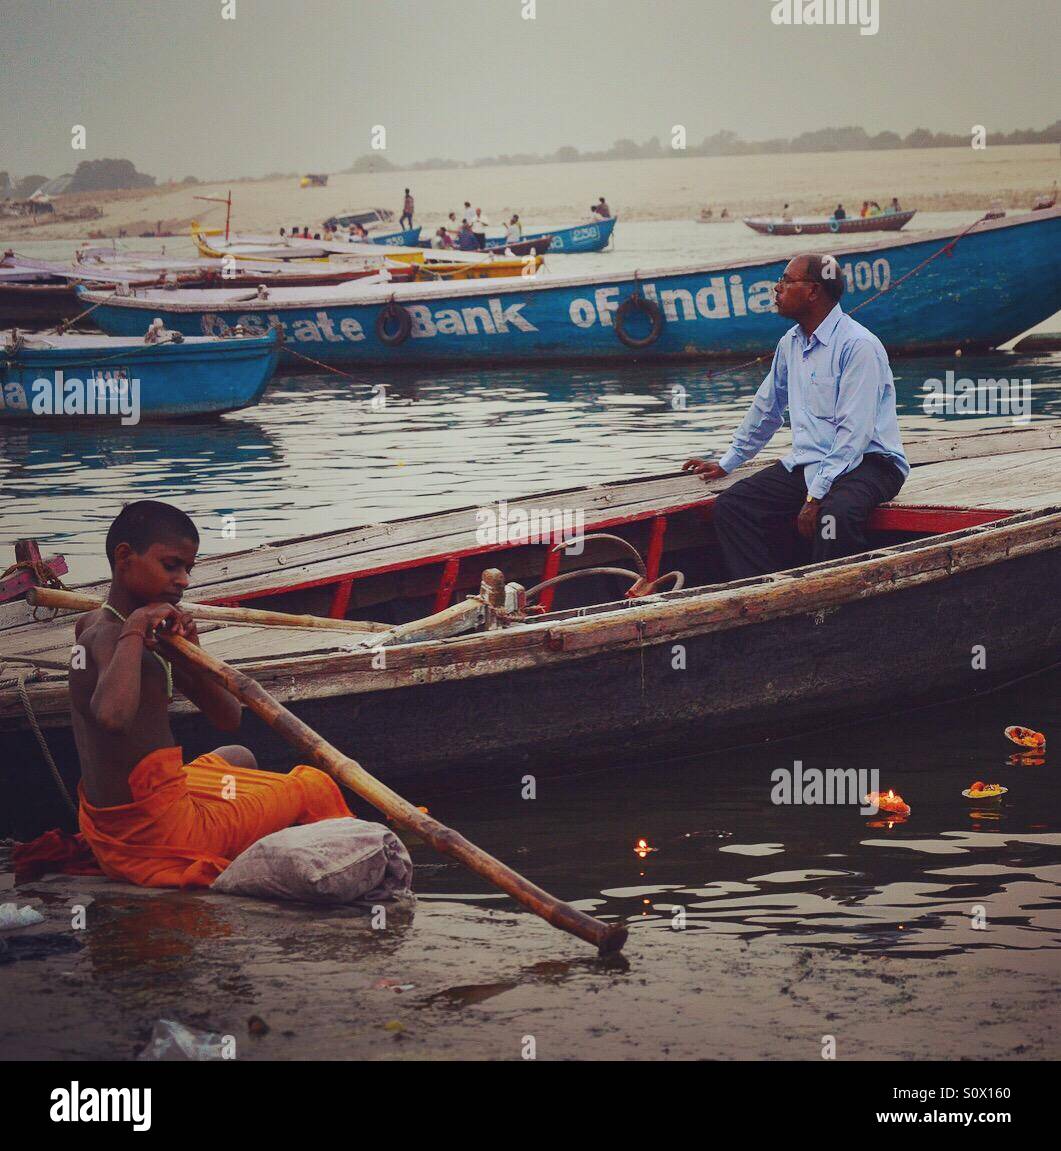 A boy in a playful mood and a man sitting on a boat on the banks of river Ganges in Varanasi, India Stock Photo